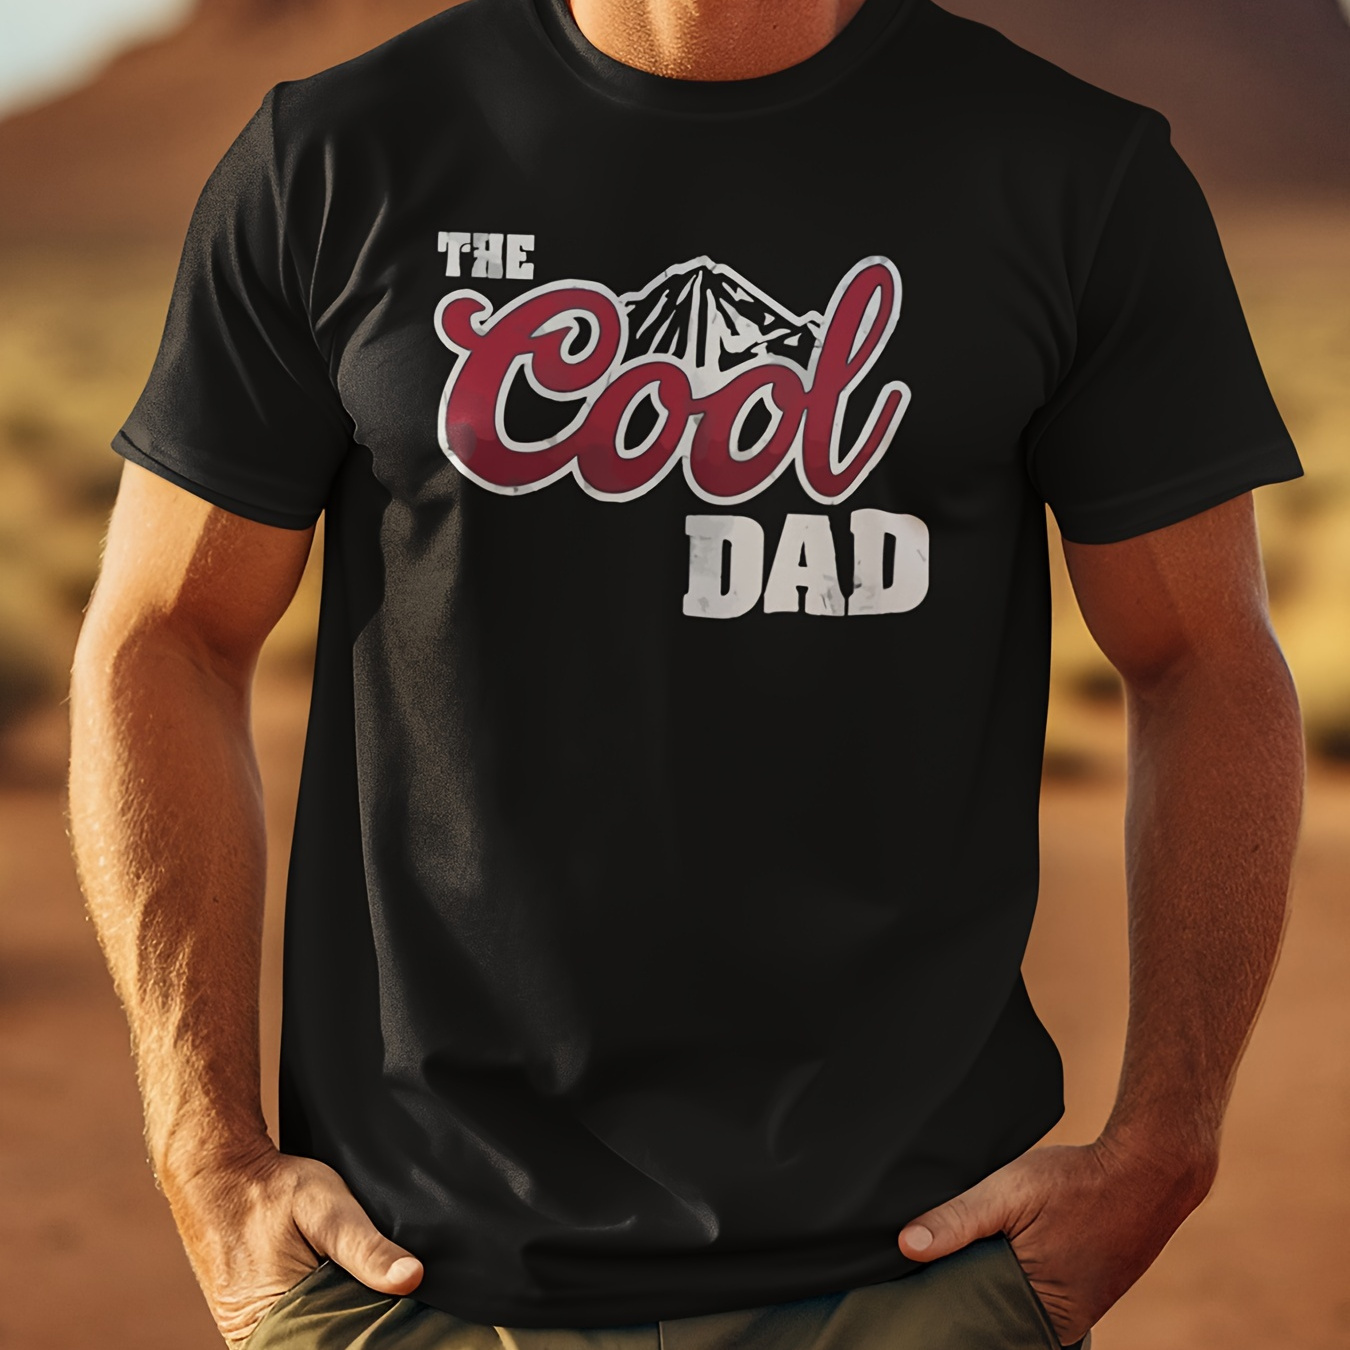 

'the Cool Dad' - Men's Front Printed Short Sleeved T-shirt - Machine Washable, Elegant Round Collar Tops - Gift For Father